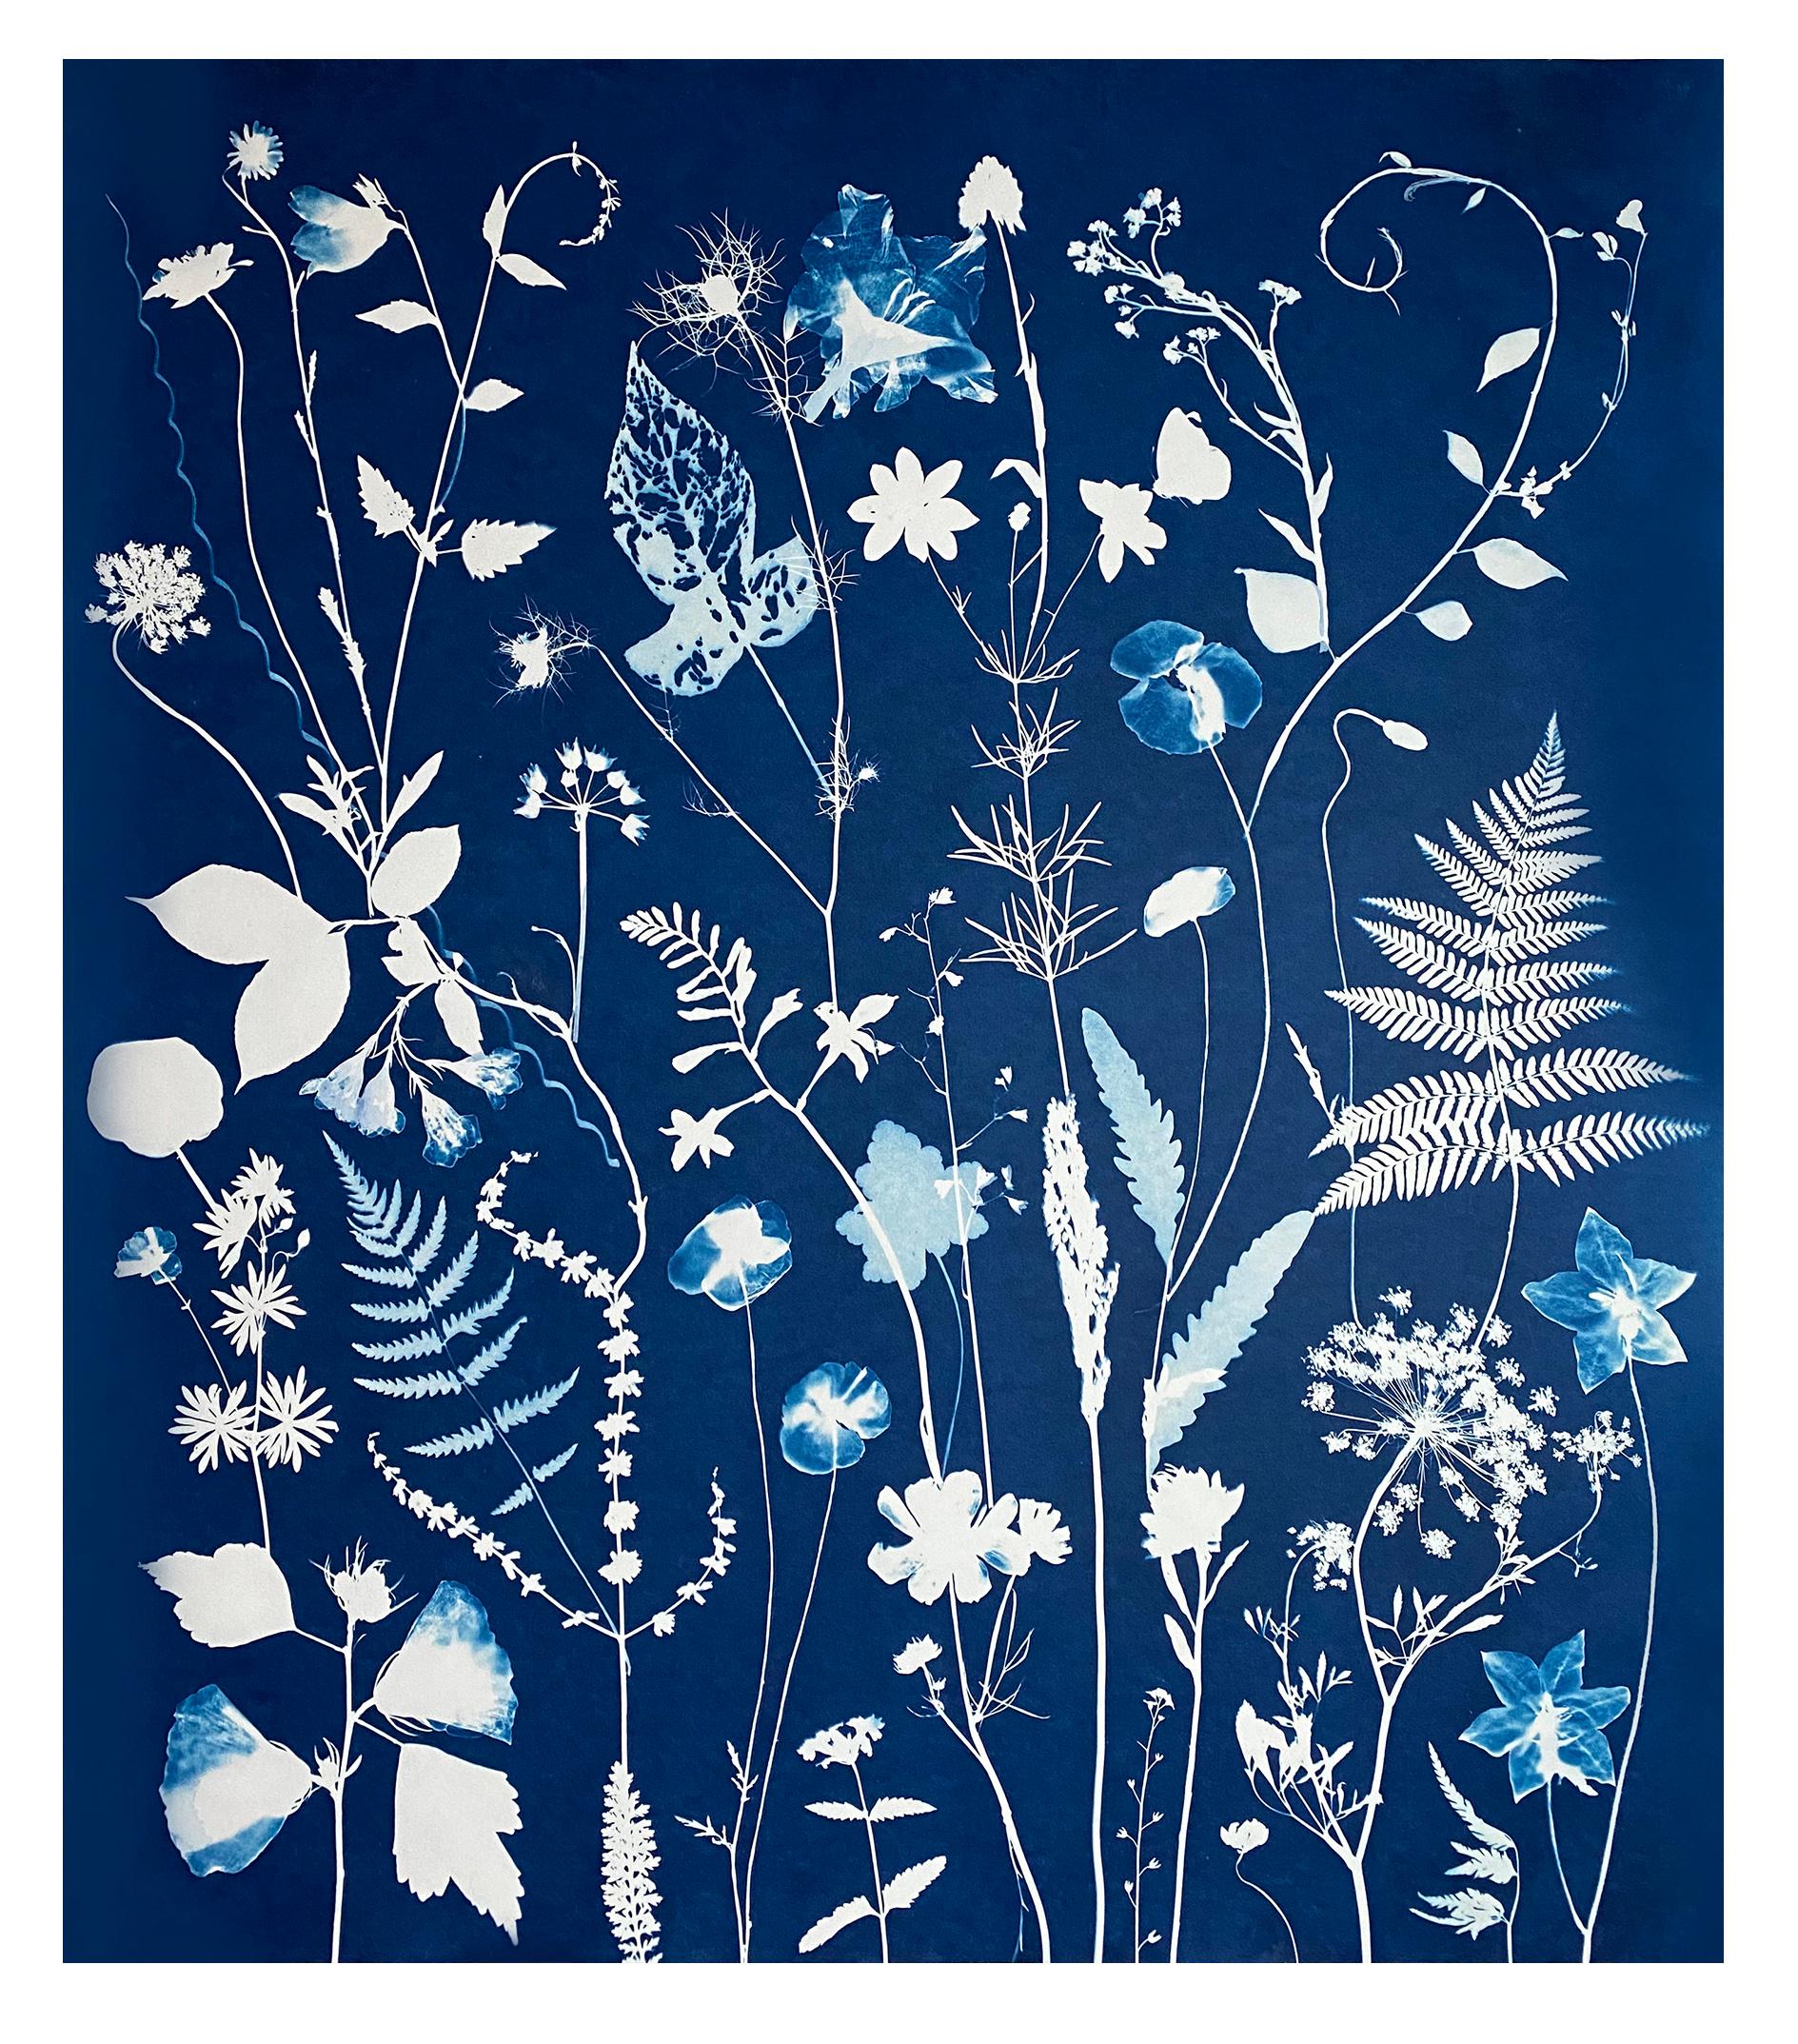 Cyanotype Painting Poppies, Rose of Sharon, Ferns, Botanical Painting in Blue - Art by Julia Whitney Barnes